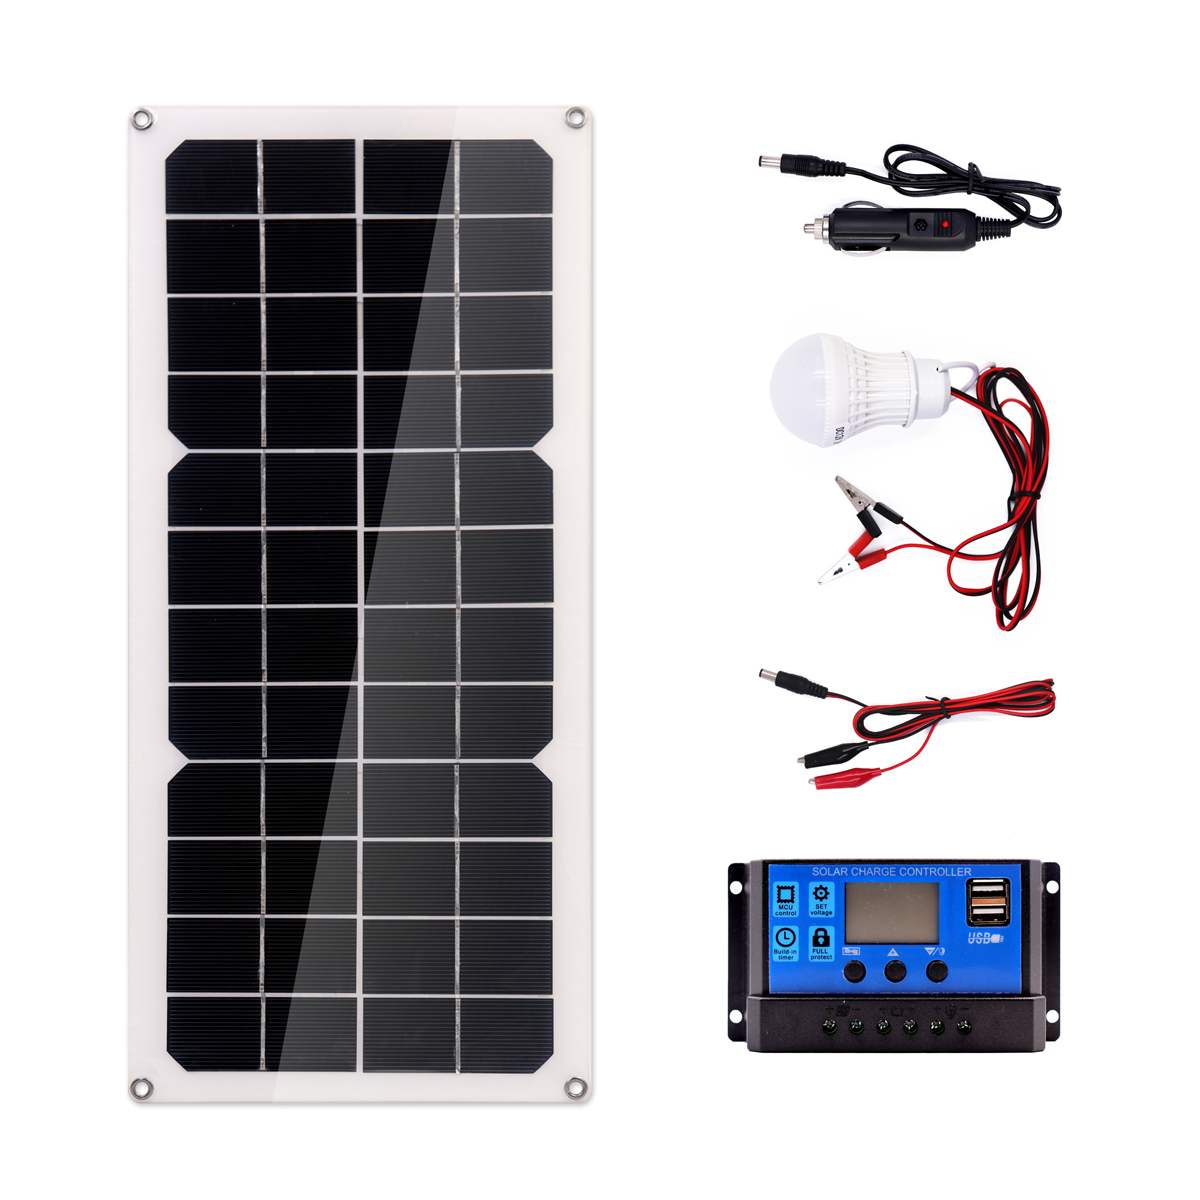 100W Zonnepaneel 18V Dual Usb Uitgang Met 3W Led Lamp + 10A Usb Solar Regulator Charger controller Voor Auto Outdoor Camping Licht